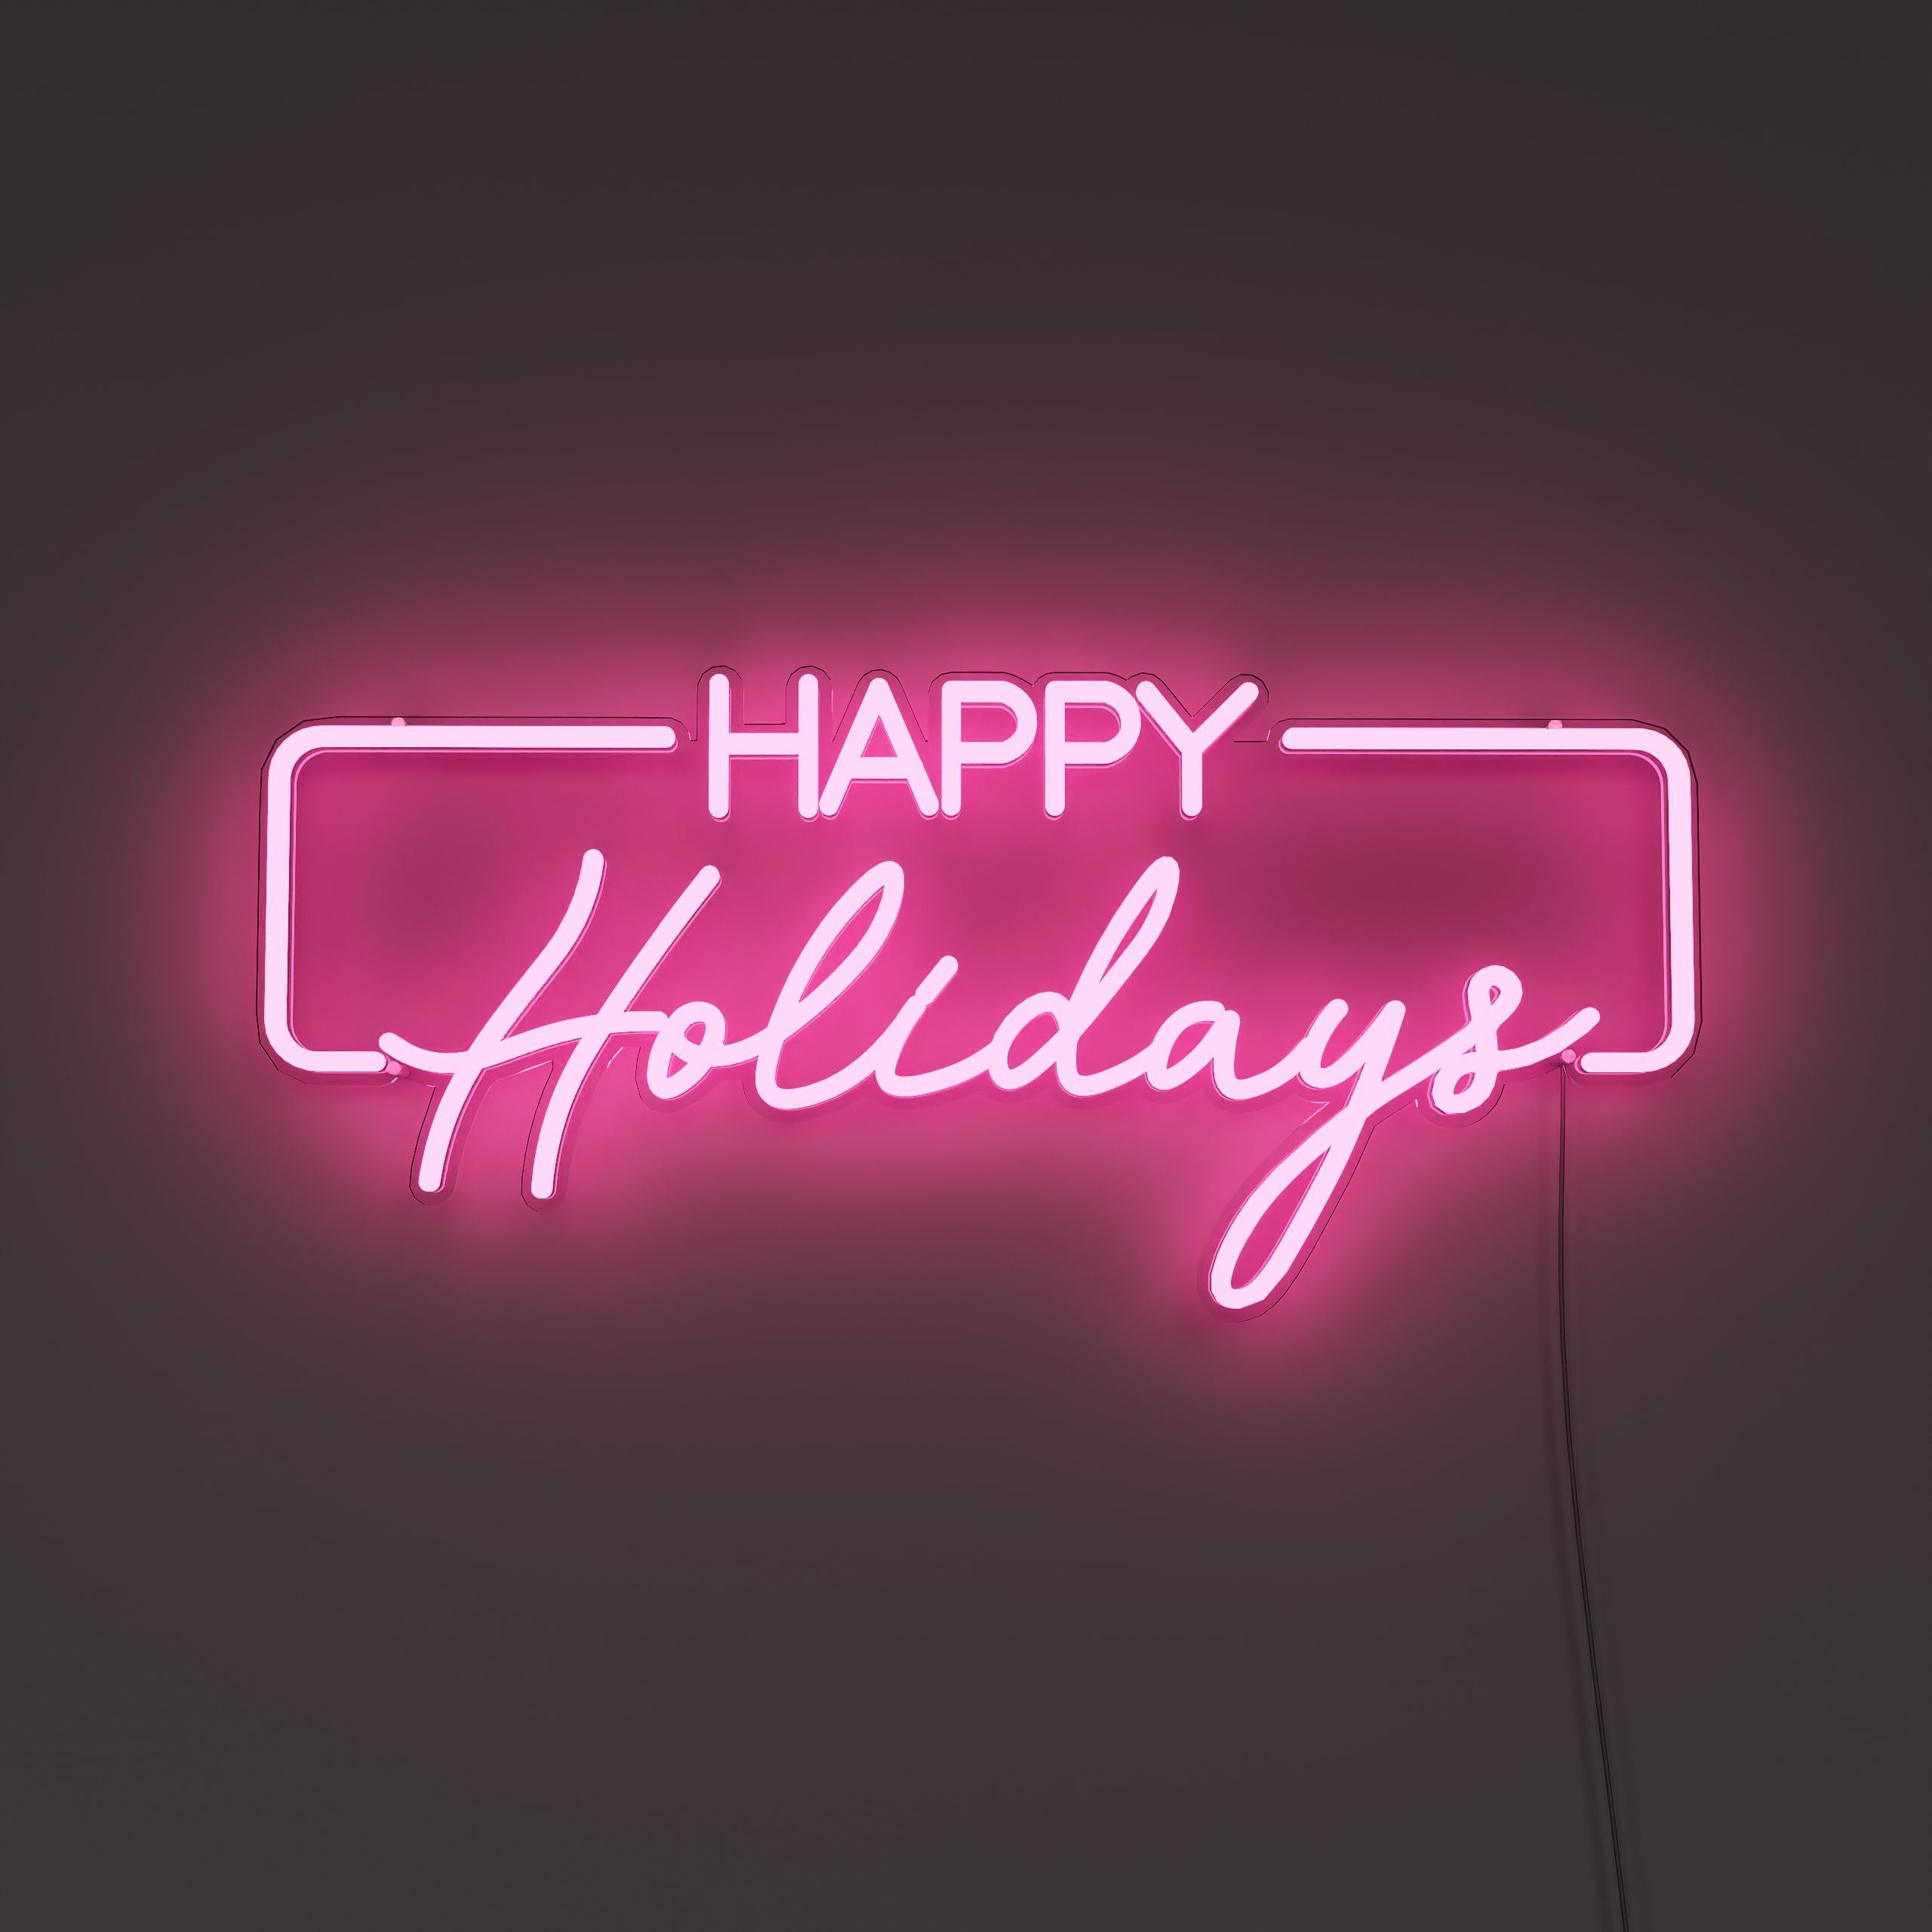 holiday-cheer-here-neon-sign-lite